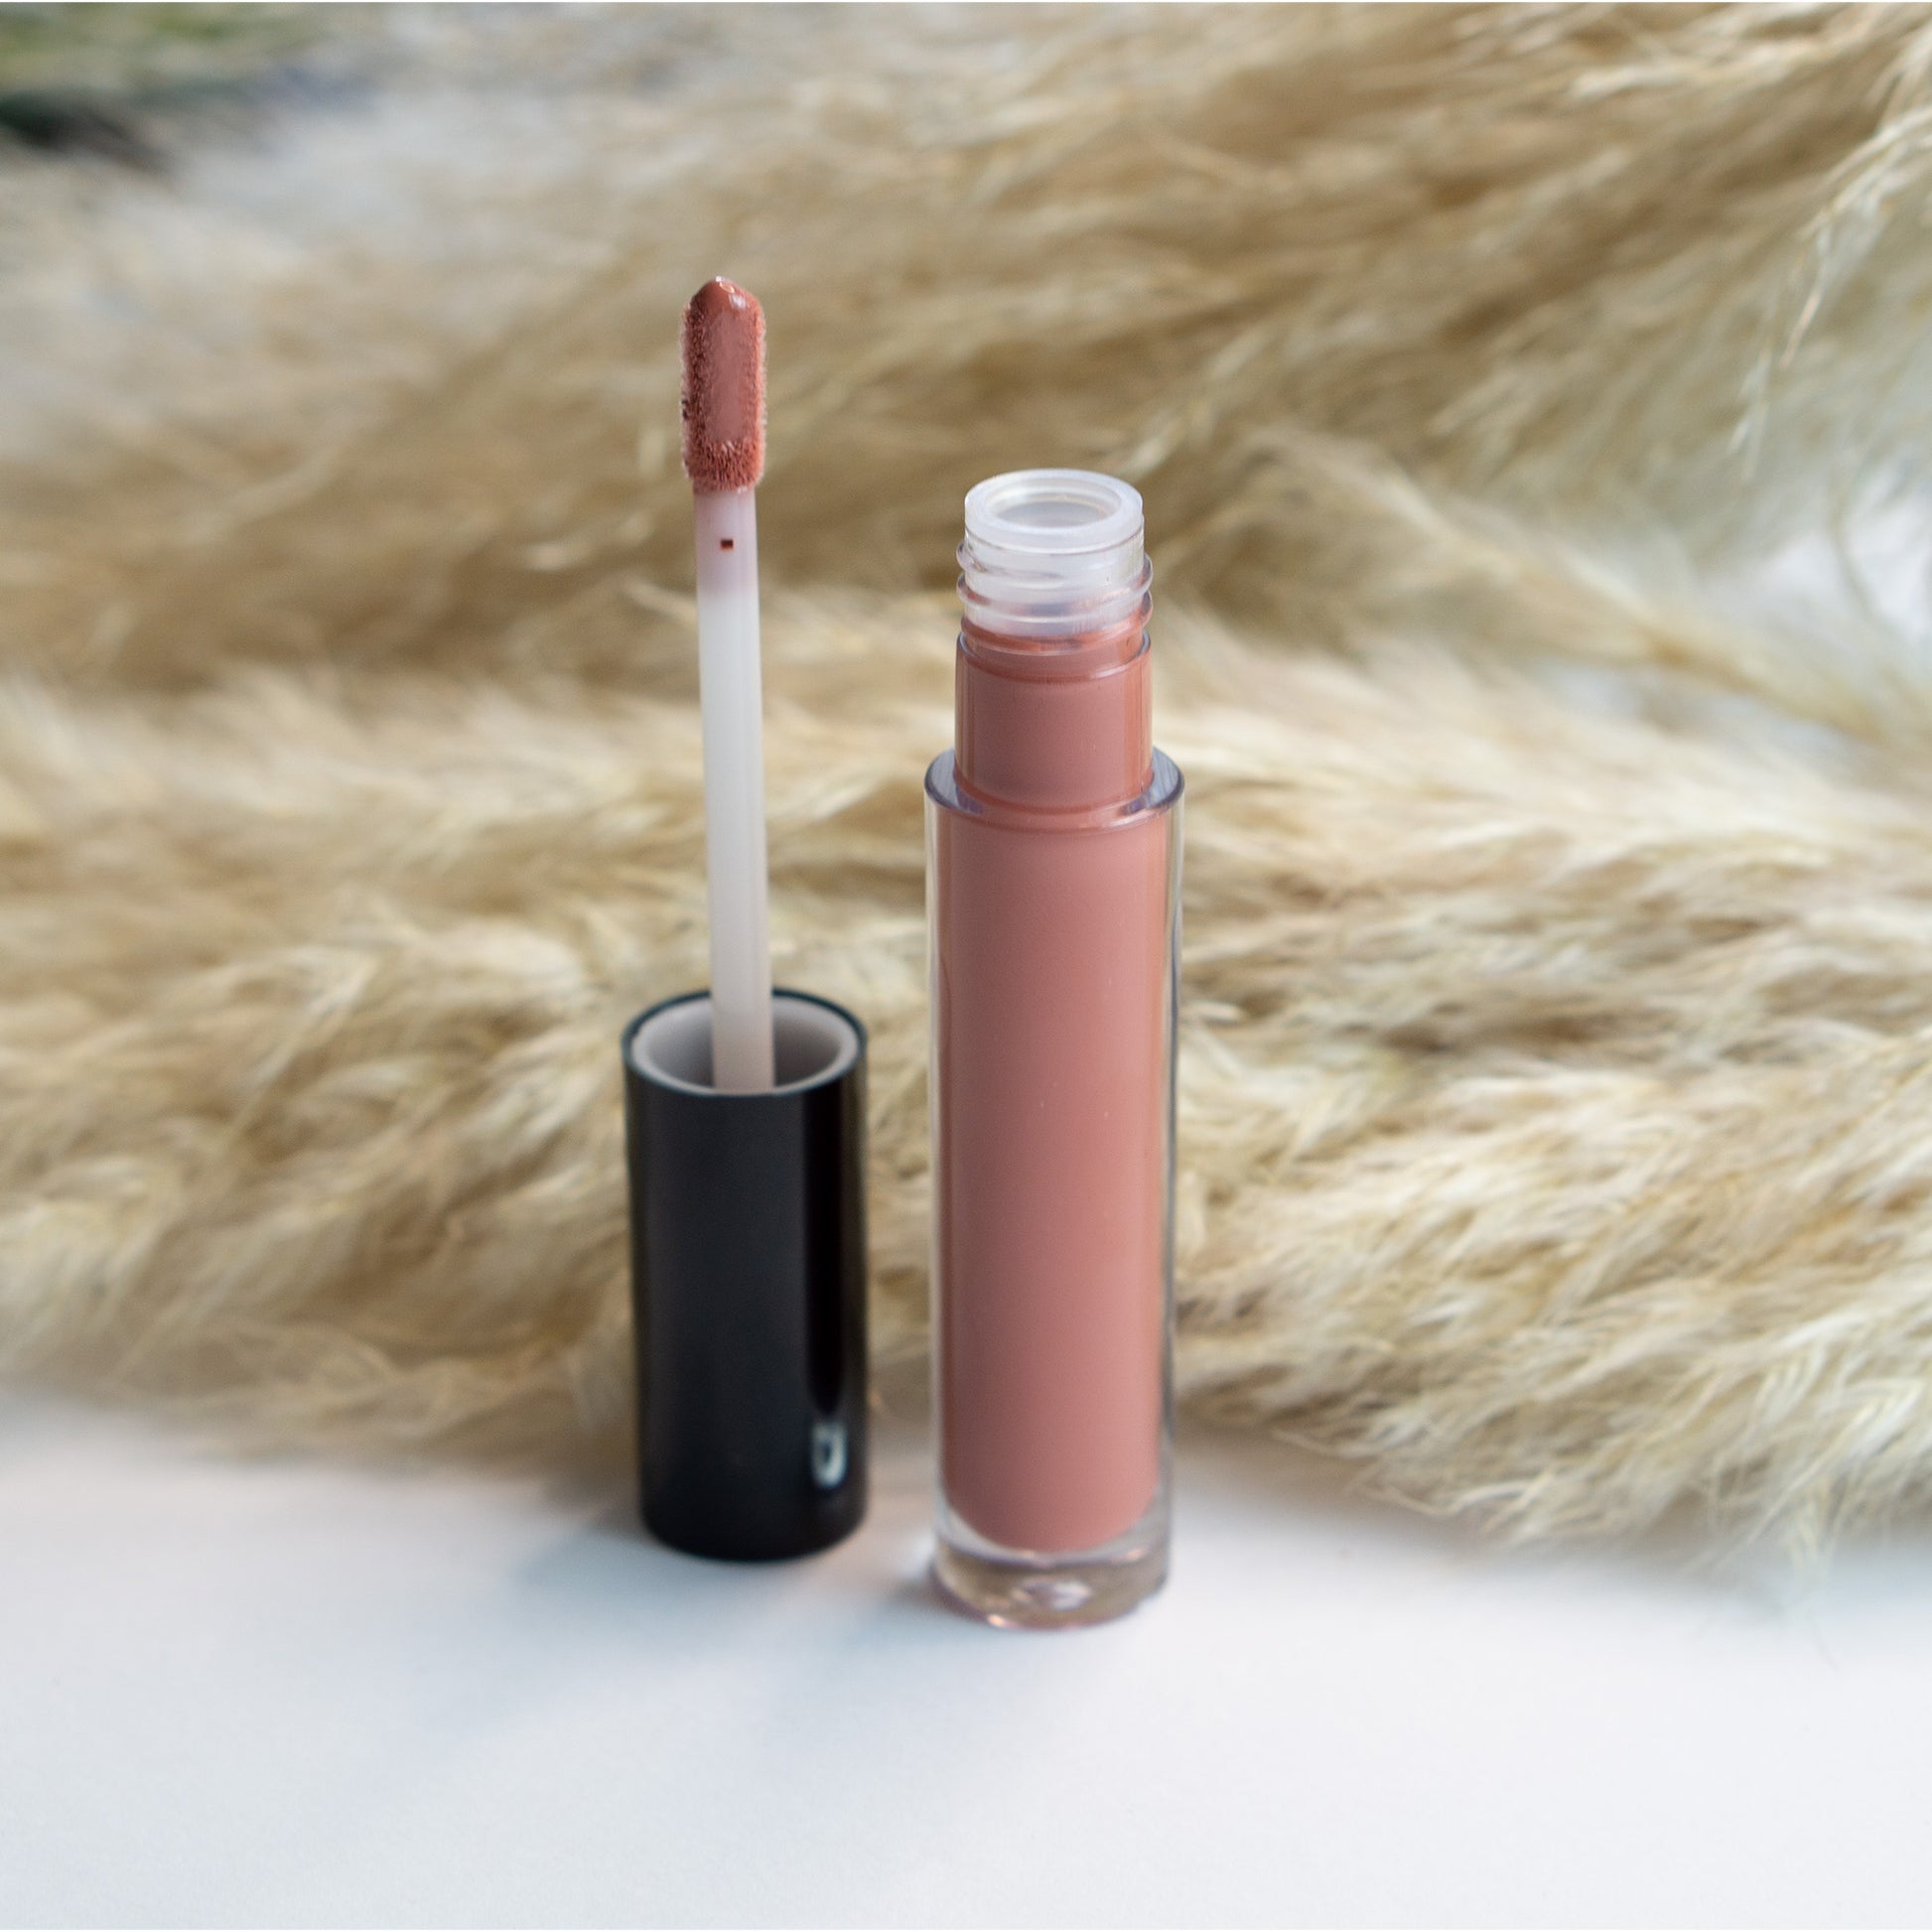 Crimson Lip Gloss. Choose between shimmer or natural finish for a sophisticated, everyday glam. This sheer tint adds the perfect touch of shine and color to elevate your style, day or night. Channel luxury with this liquid lip gloss in your Cruisin Organics collection